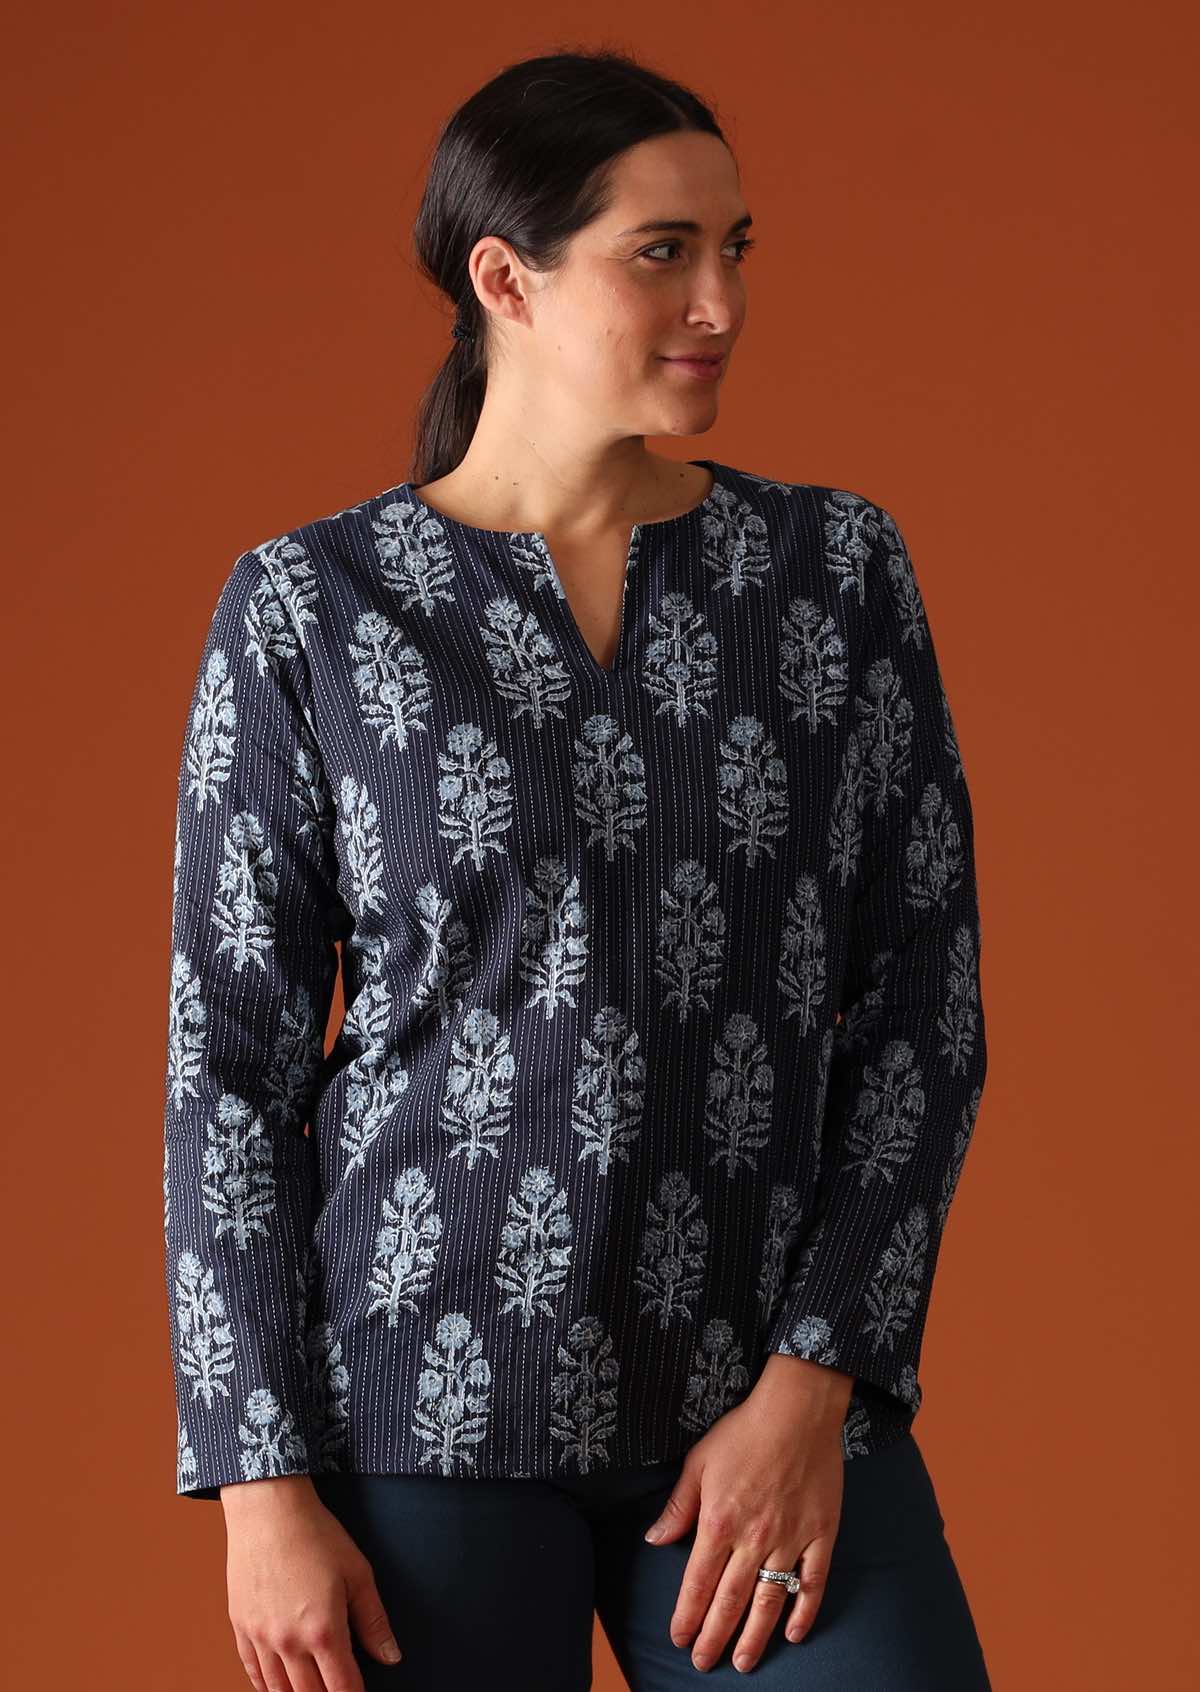 Model in navy blue cotton blouse with traditional Indian motif